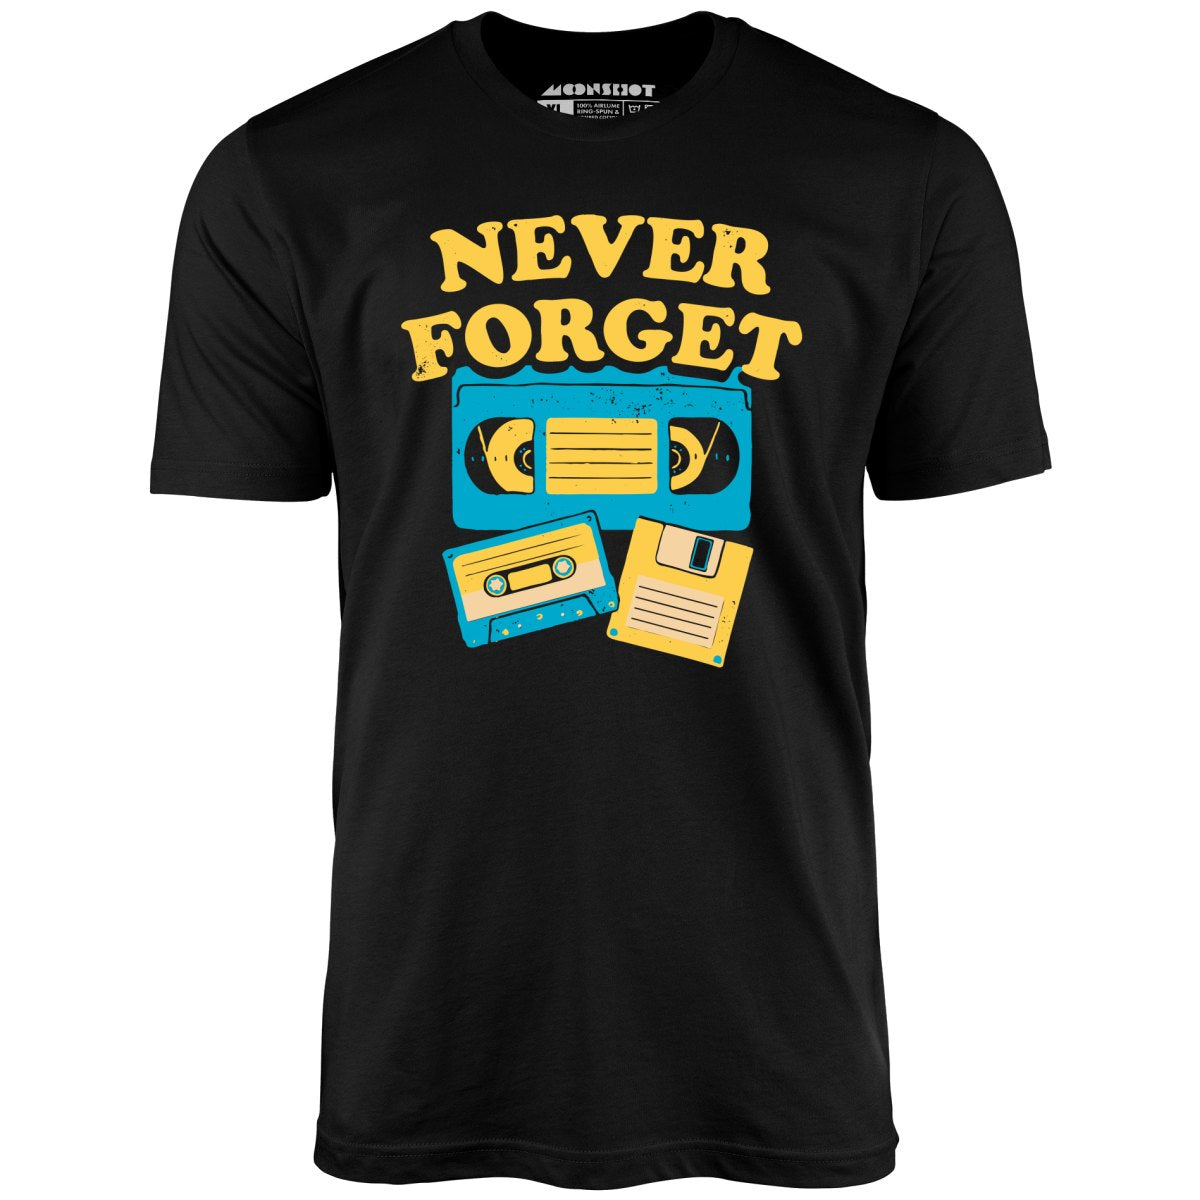 Never Forget - Unisex T-Shirt